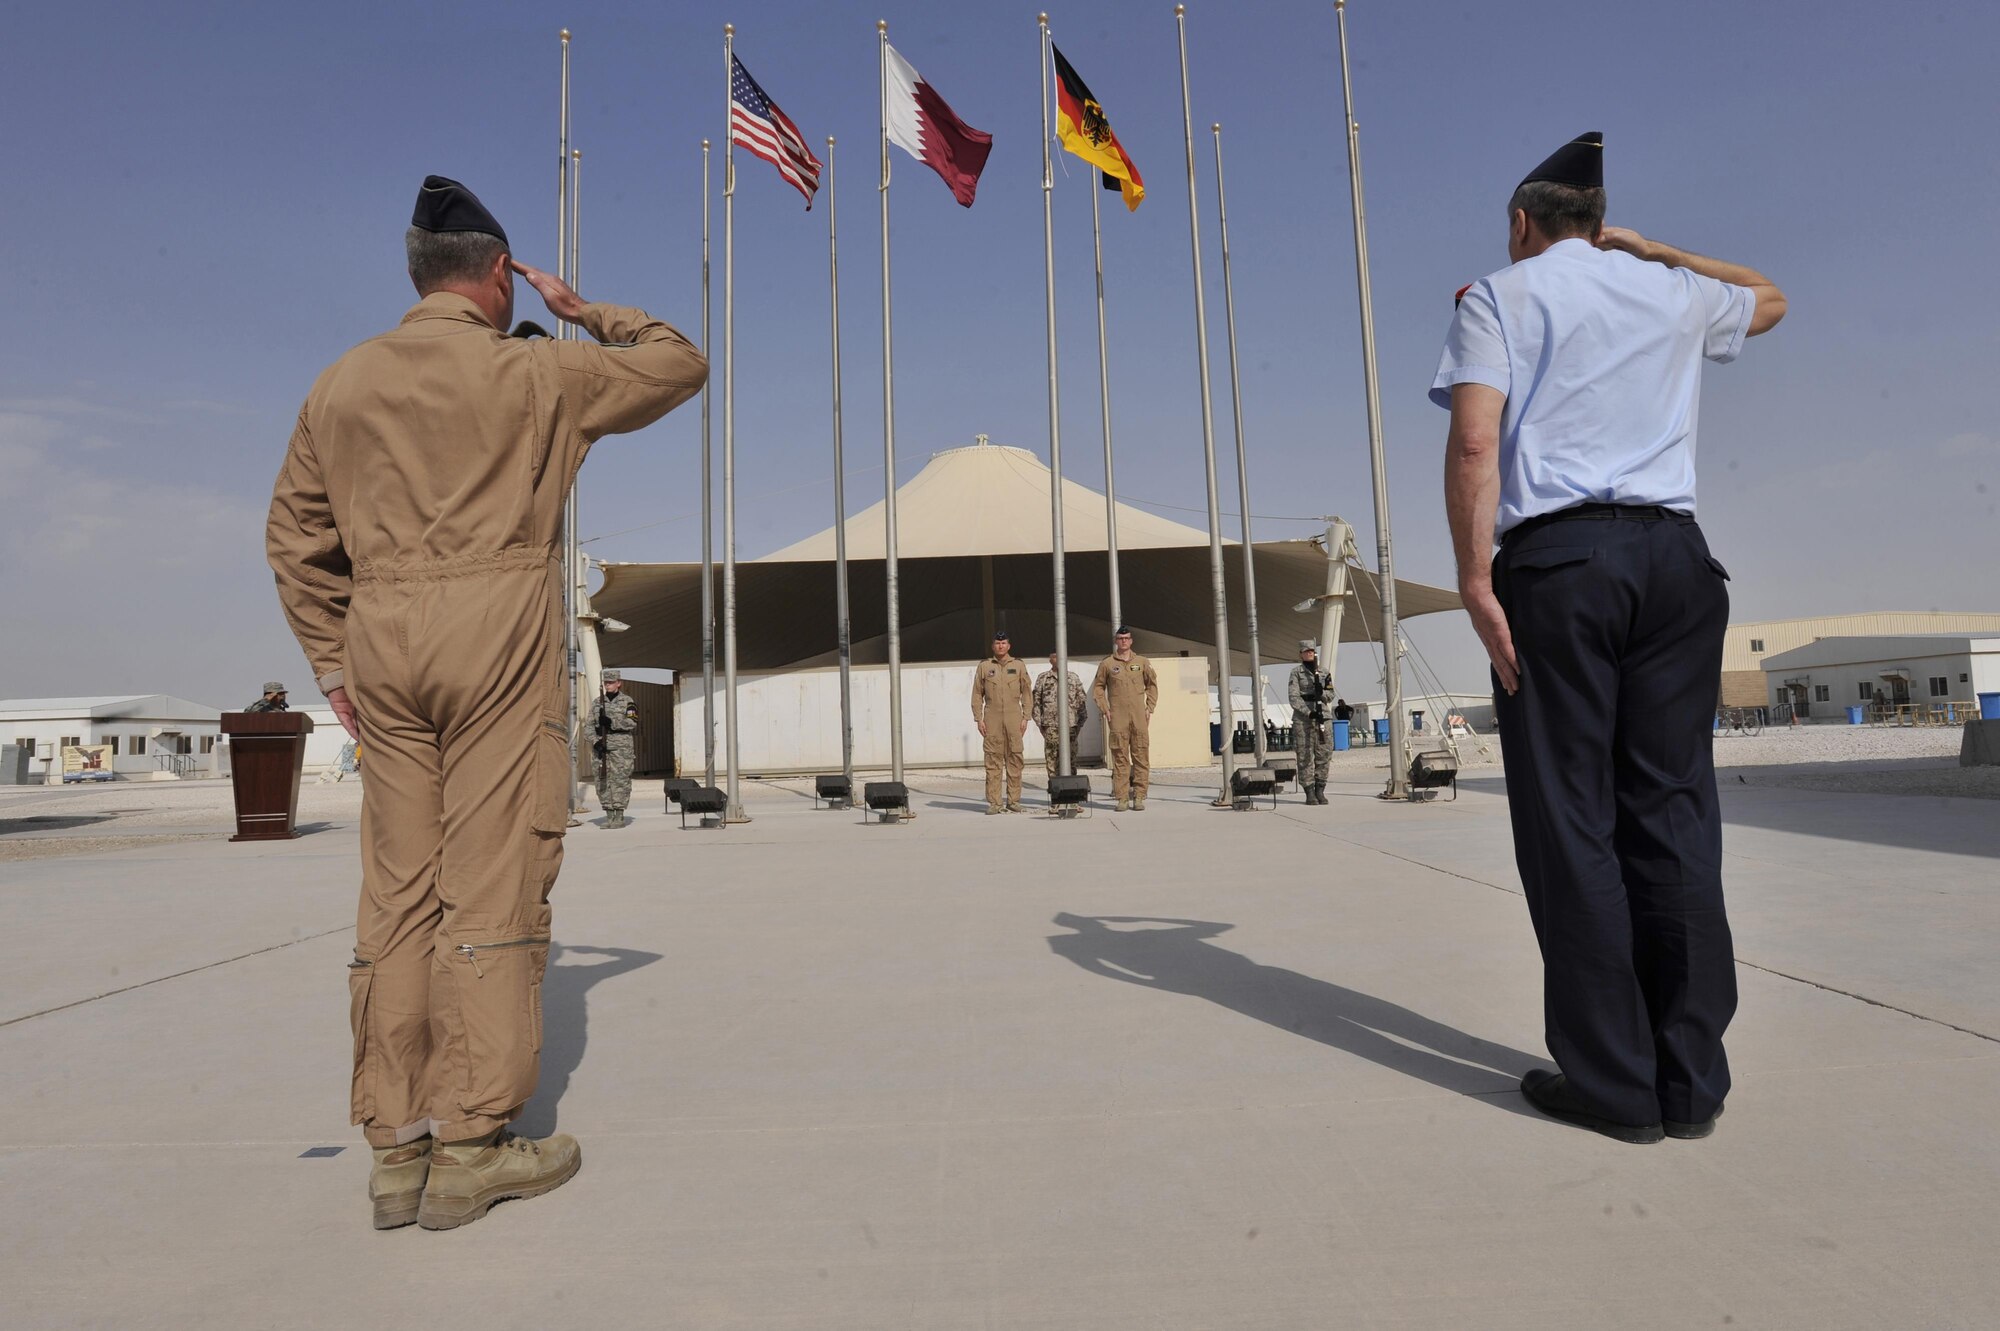 Lt. Gen. Joachim Wundrak (right), commander, German Air Operations Command and German Air Force Col. Gerhard Roubal, salute during a German flag raising ceremony at Al Udeid Air Base, Qatar, Feb. 8, 2016. The ceremony recognized the addition of Germany to the coalition supporting Operation Inherent Resolve. (U.S. Air Force photo by Master Sgt. Joshua Strang/Released)